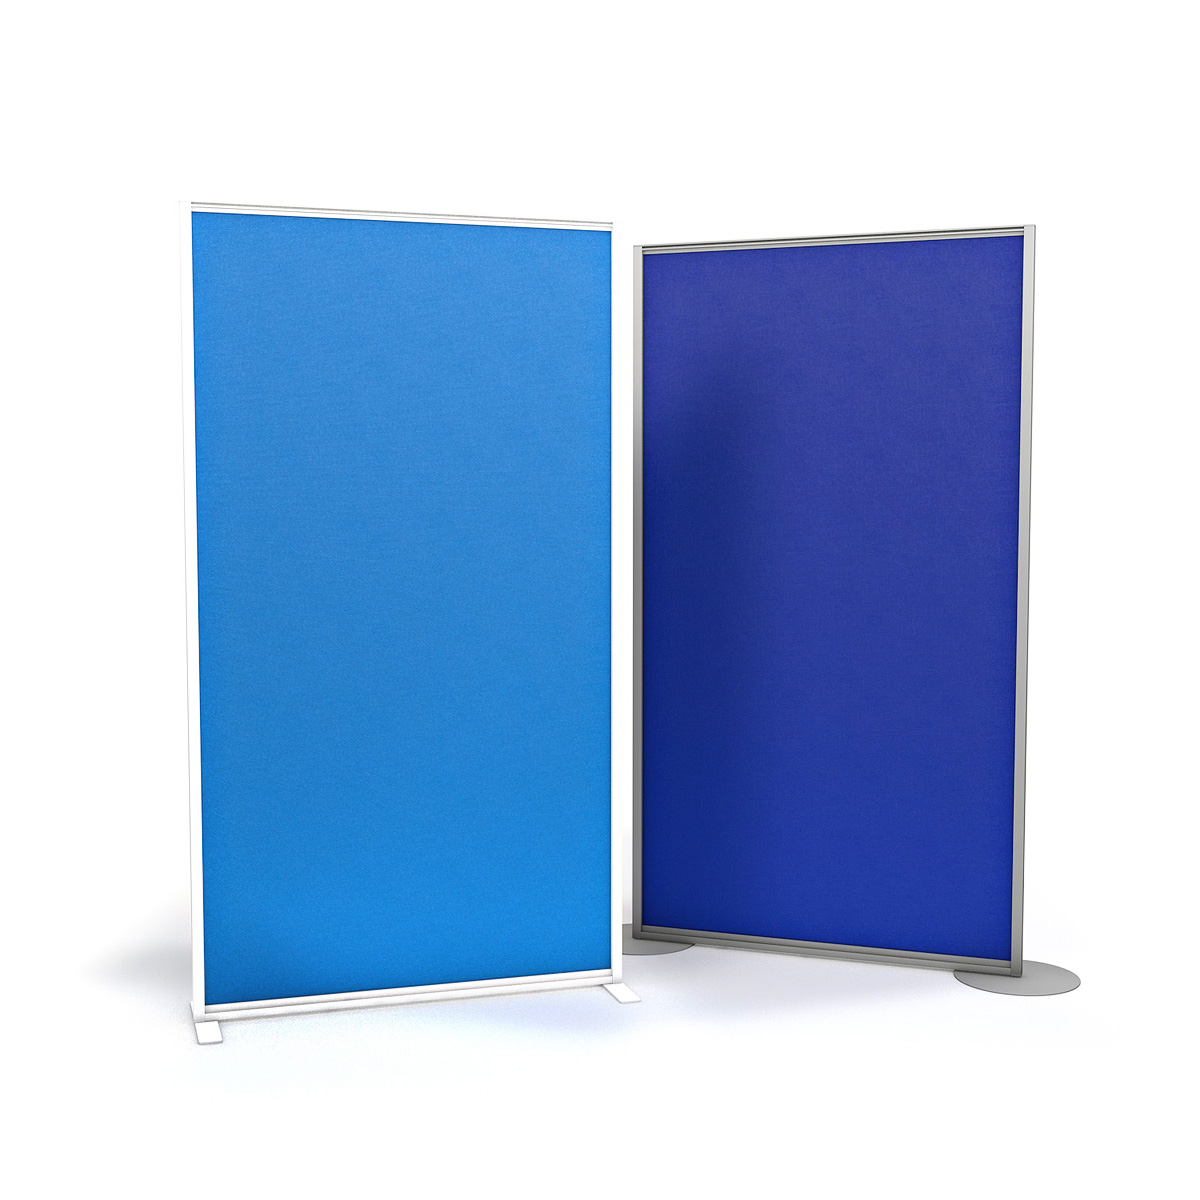 FRONTIER® Free Standing Office Partitions Are Supplied With Two Stabilising Feet or Round Disc Feet